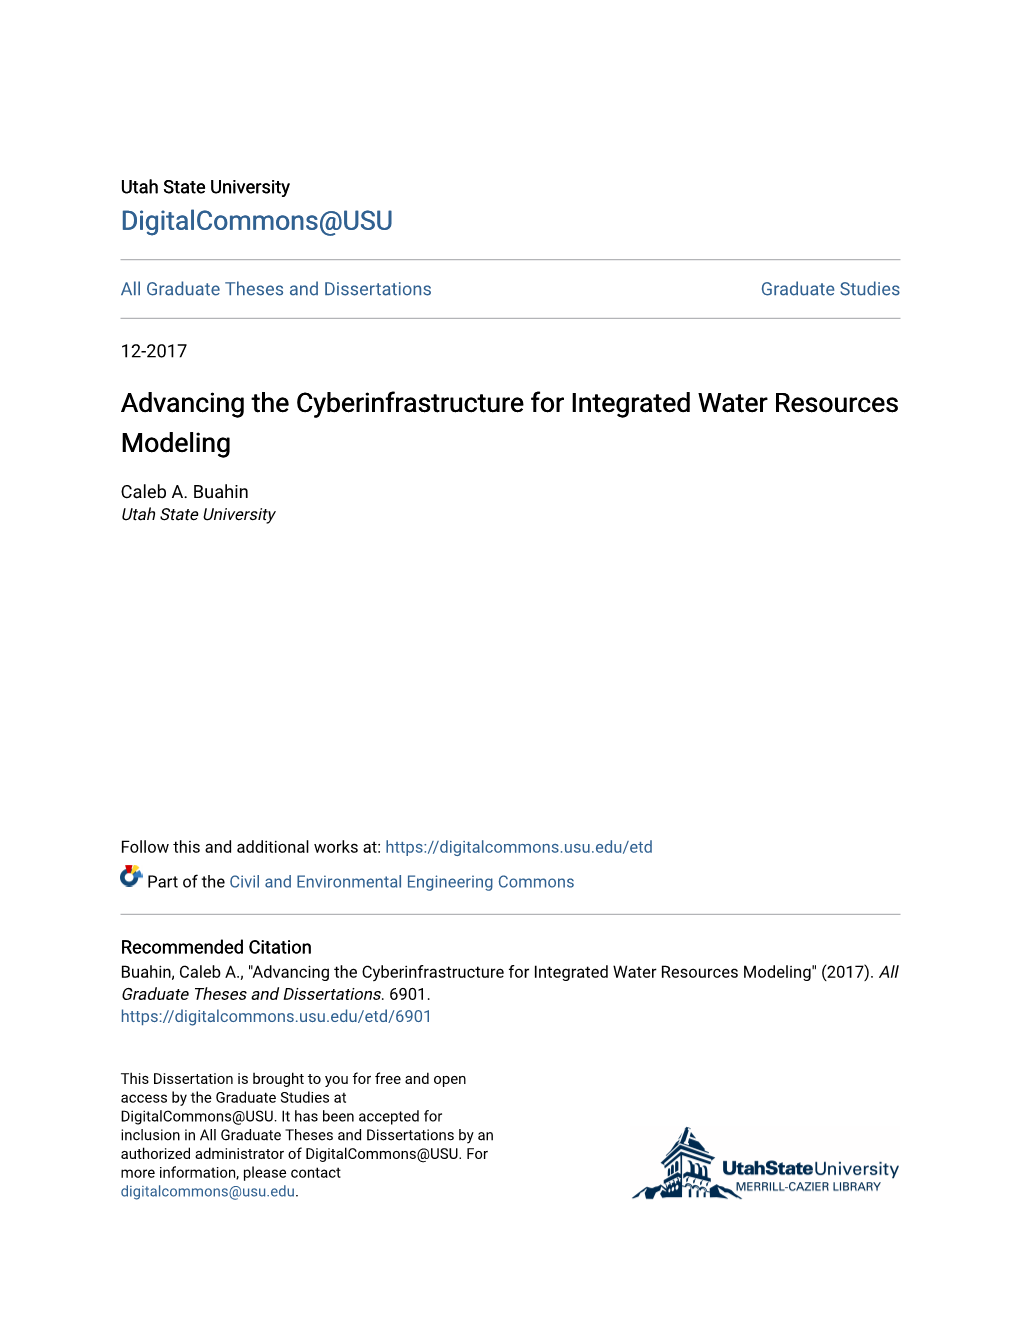 Advancing the Cyberinfrastructure for Integrated Water Resources Modeling